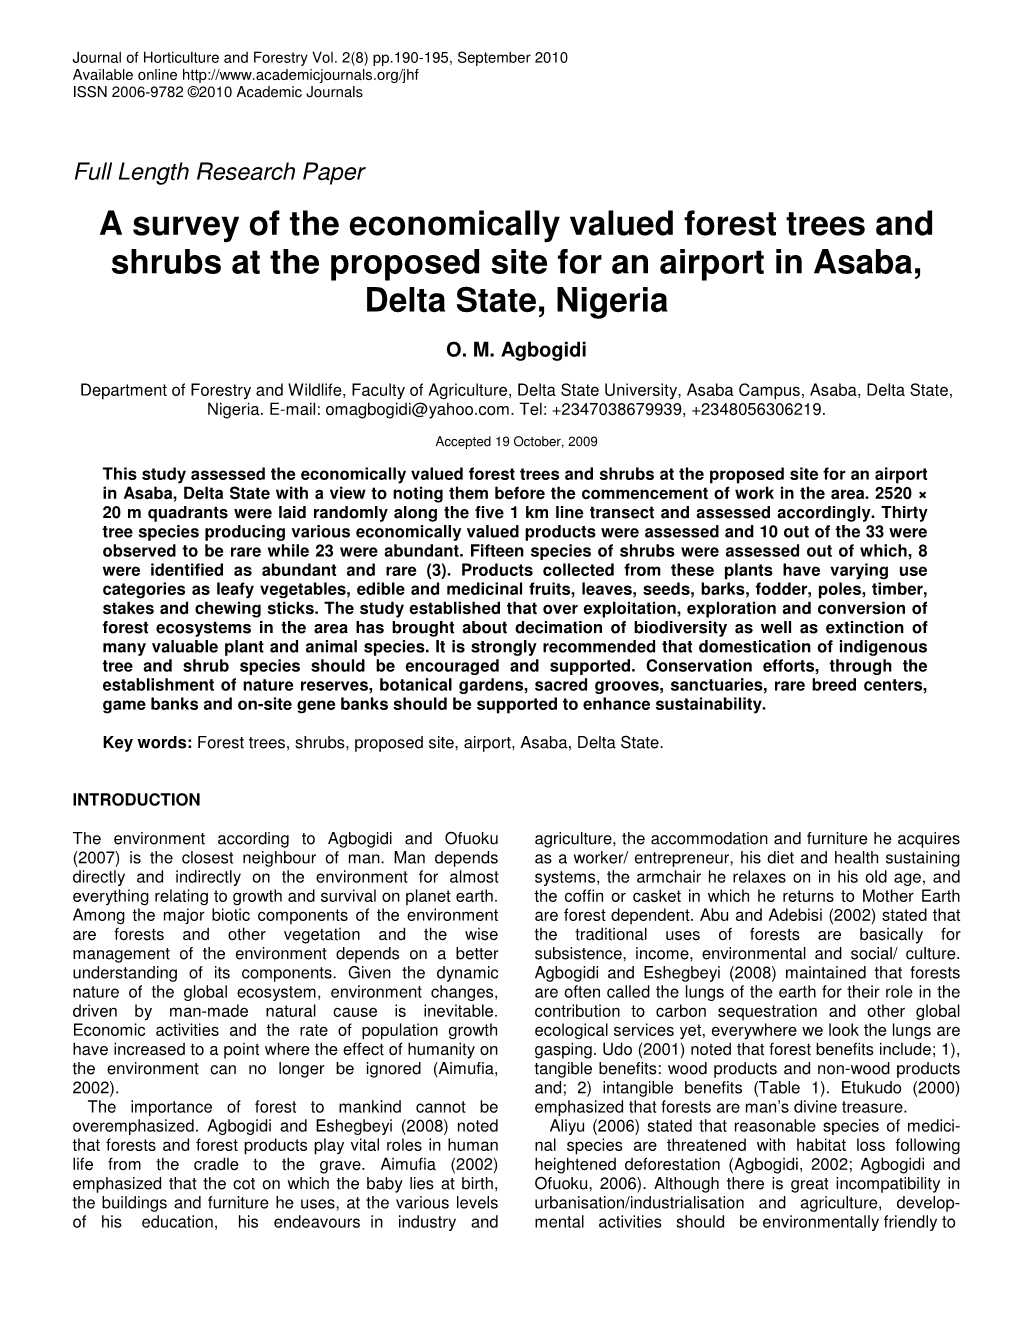 A Survey of the Economically Valued Forest Trees and Shrubs at the Proposed Site for an Airport in Asaba, Delta State, Nigeria